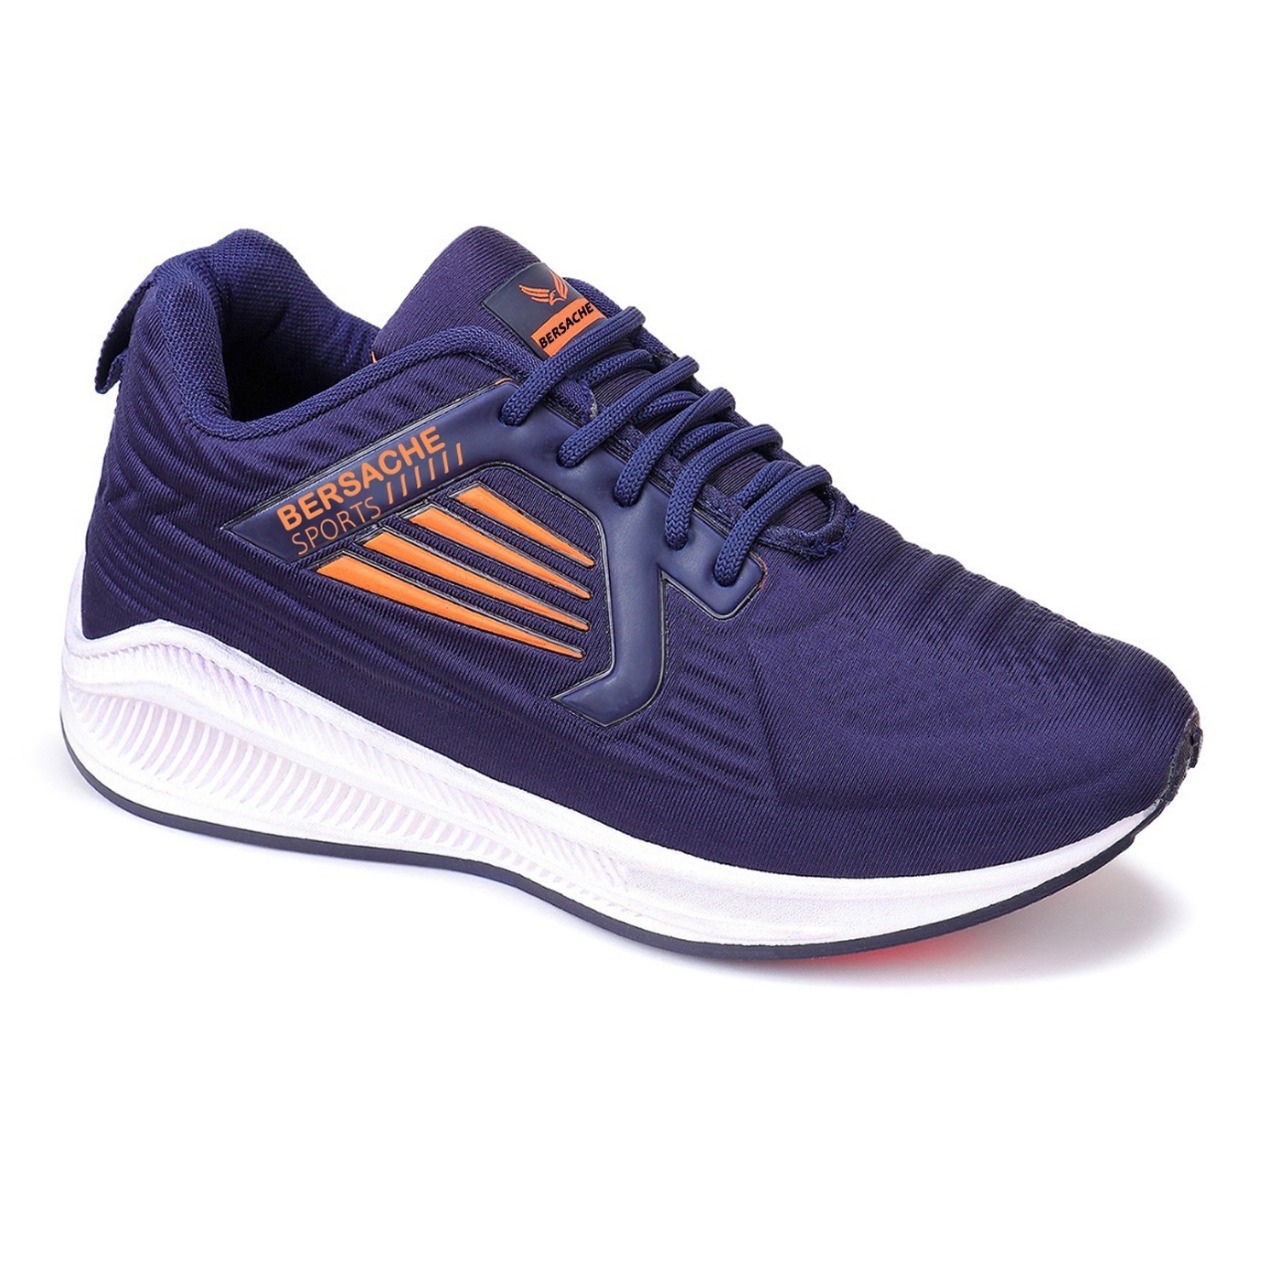 Bersache Sports Shoes For Men | Latest Stylish Sports Shoes For Men | Lace-Up Lightweight (Navy) Shoes For Running, Walking, gym ,Trekking and hiking Shoes For Men